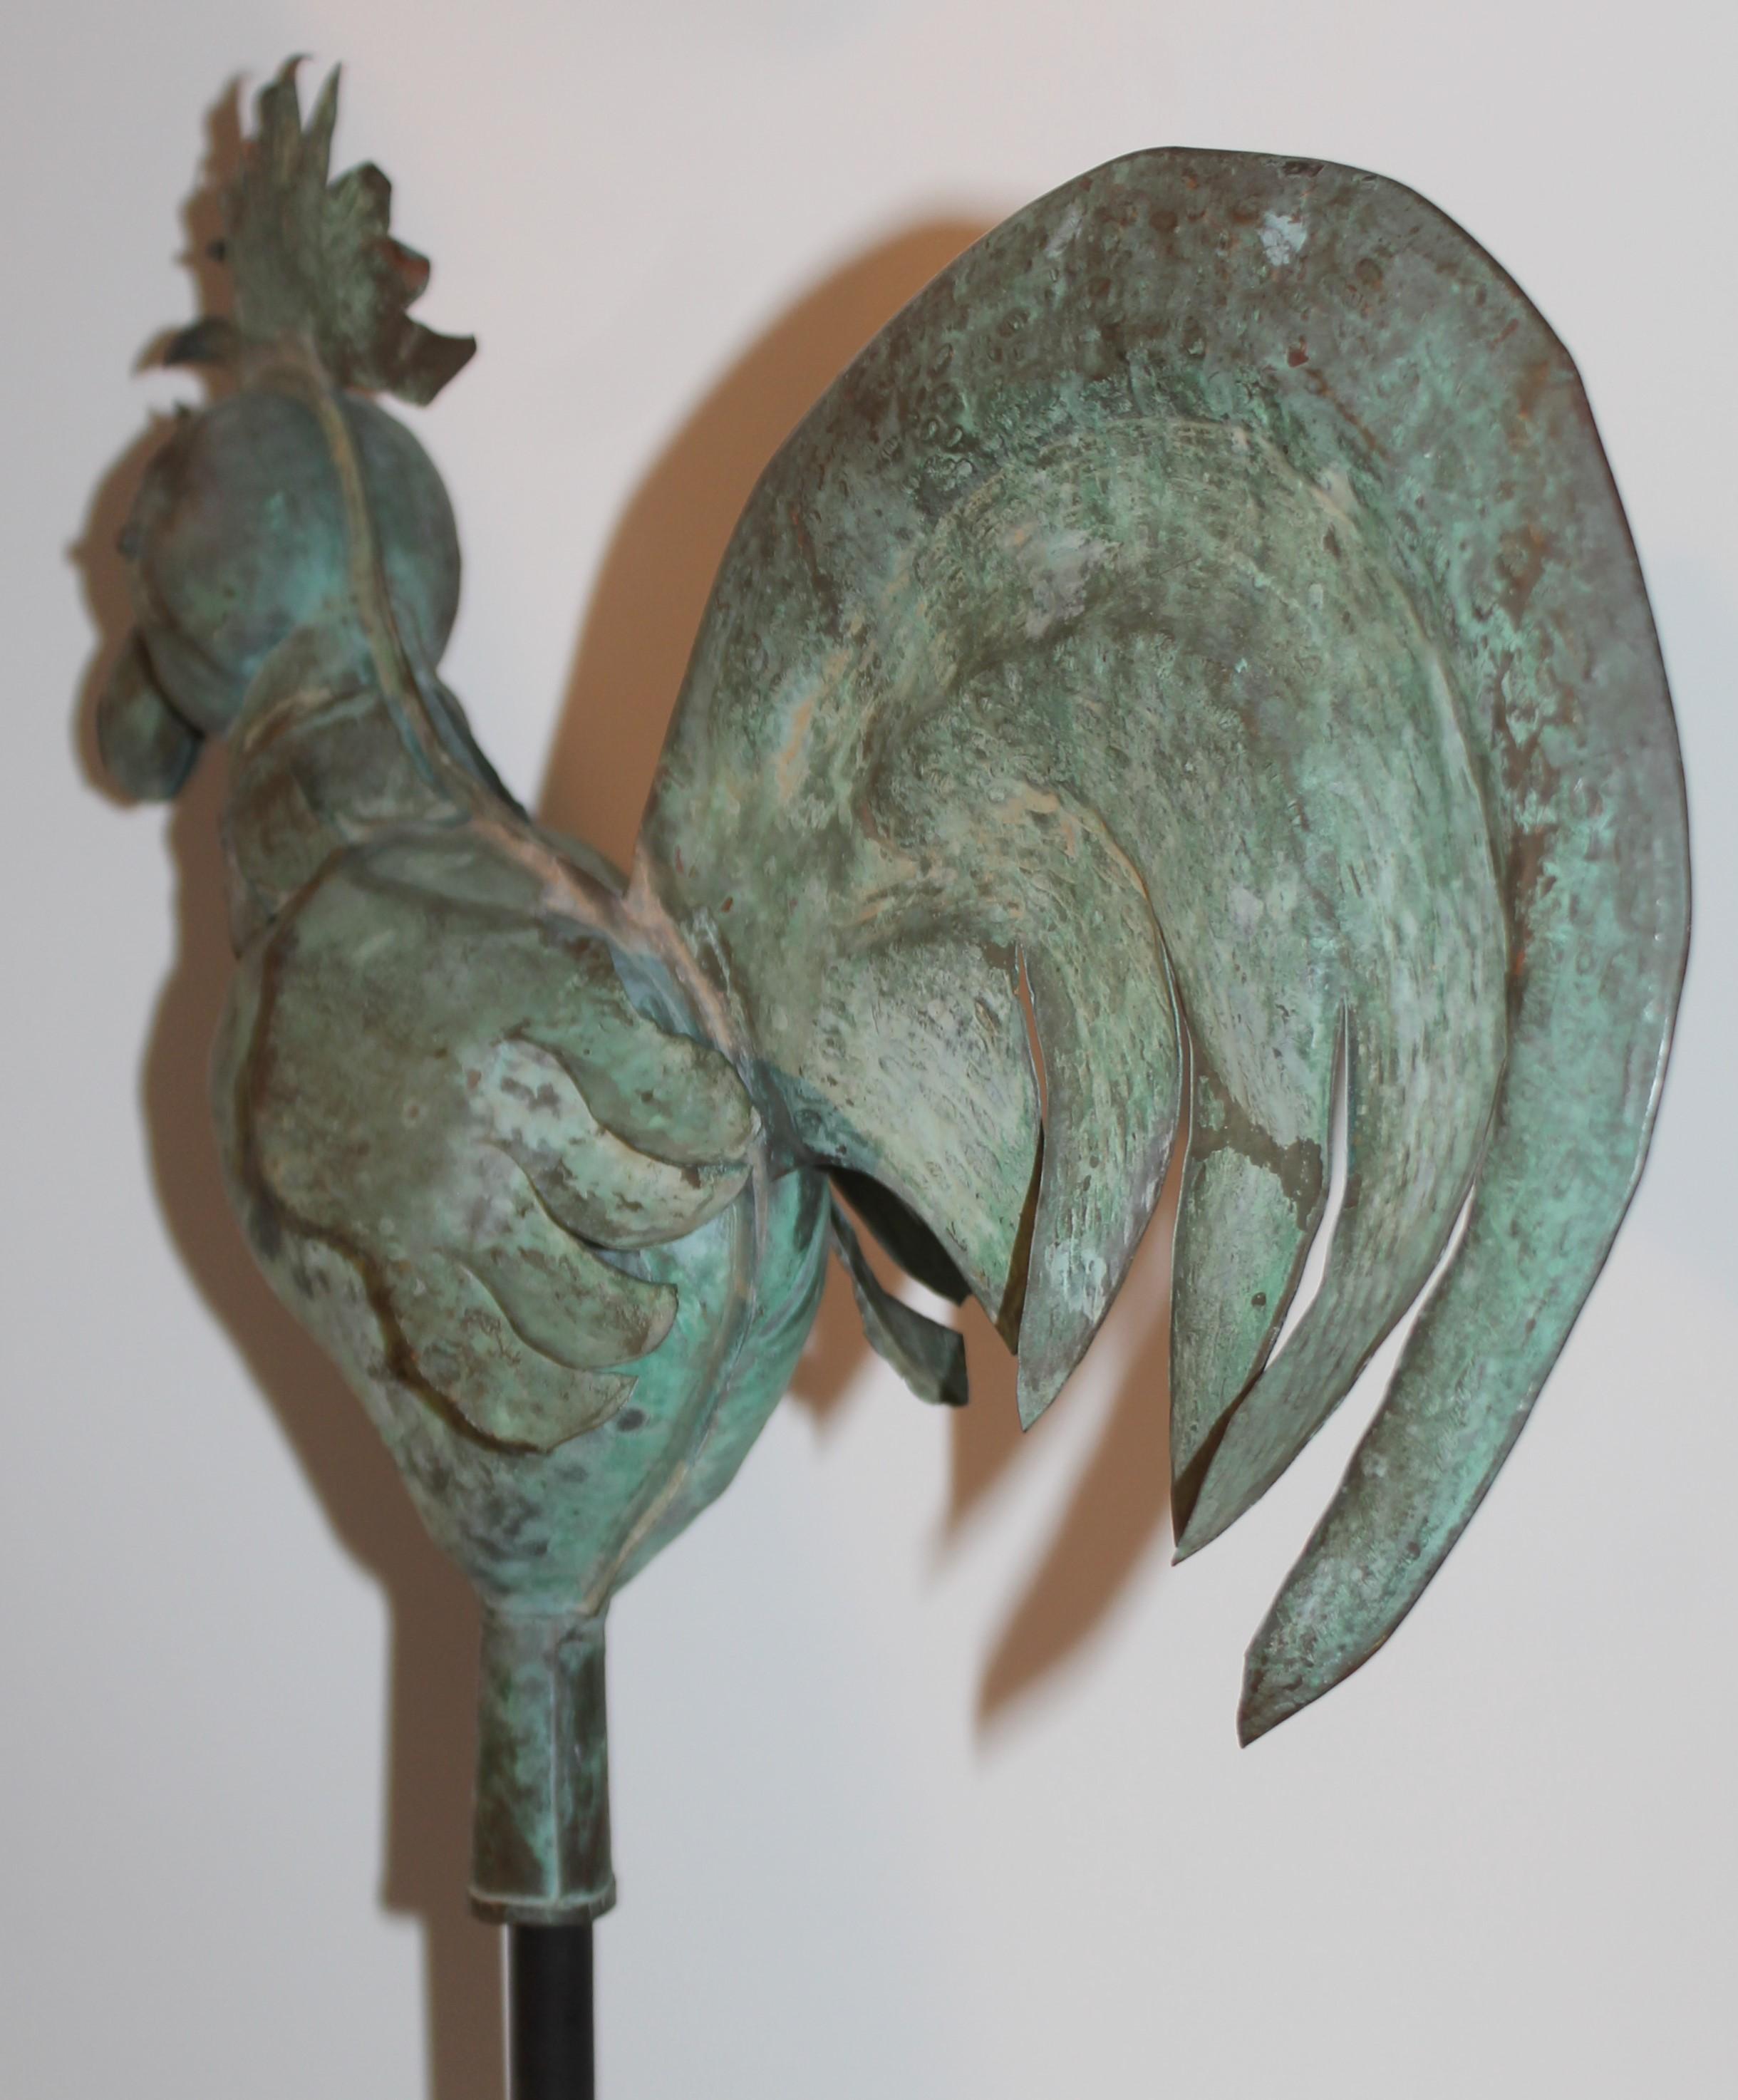 19Thc Folky rooster weather vane from Maine is in great condition.This early bird flew in from the state of Maine. It comes with a custom made wood base or stand.